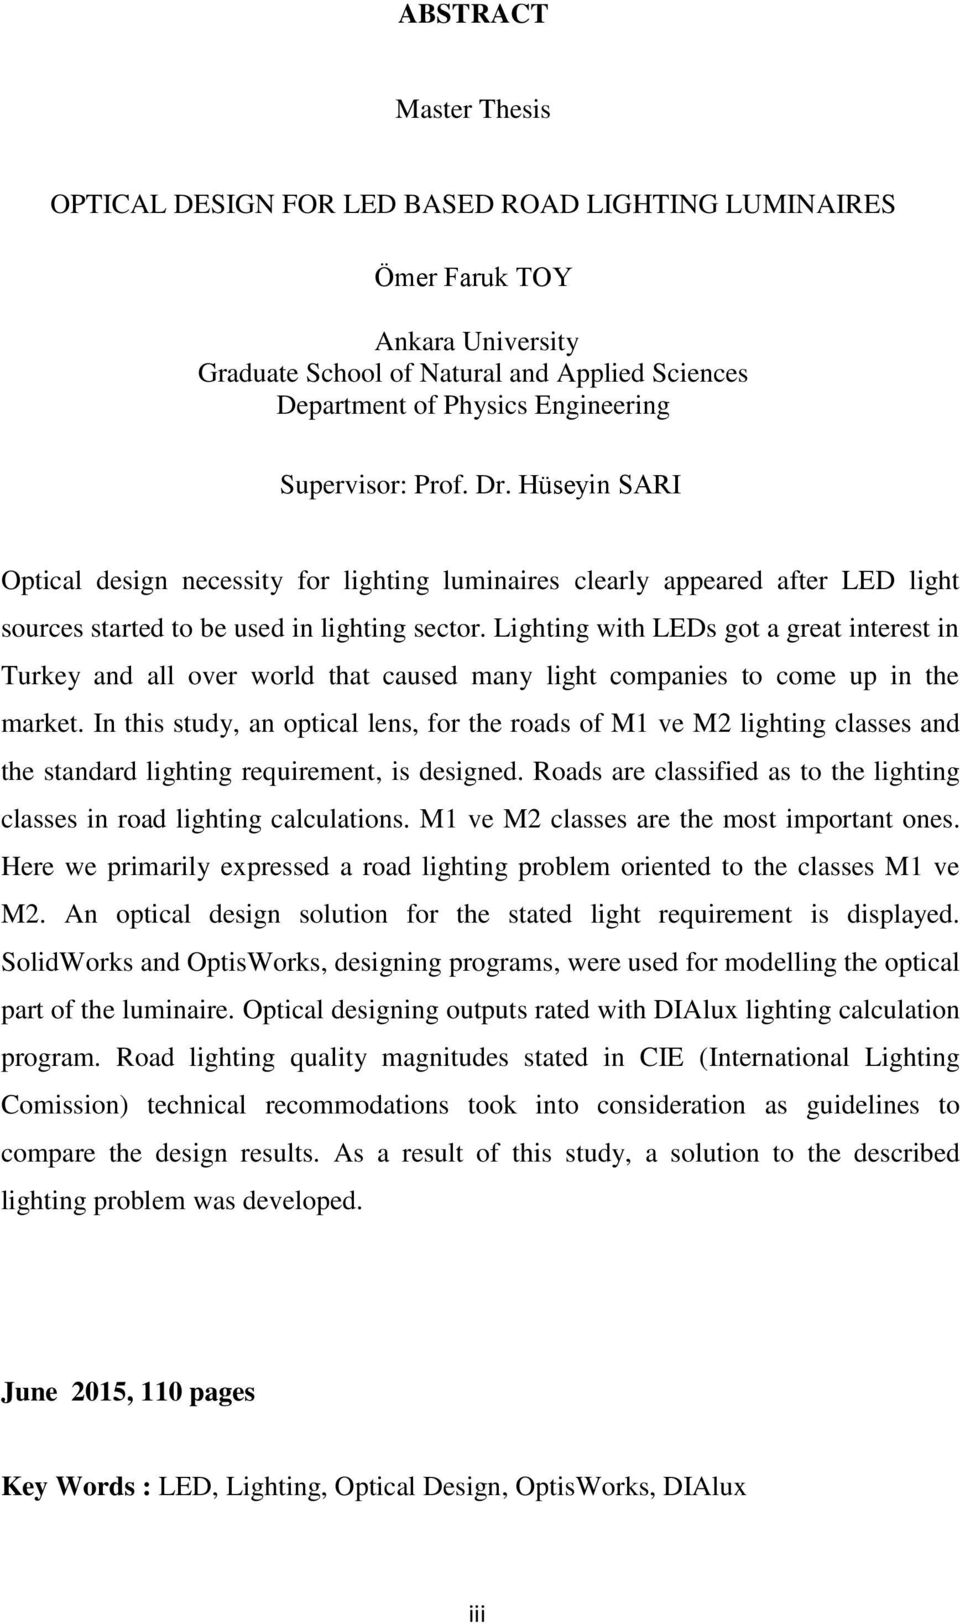 Lighting with LEDs got a great interest in Turkey and all over world that caused many light companies to come up in the market.